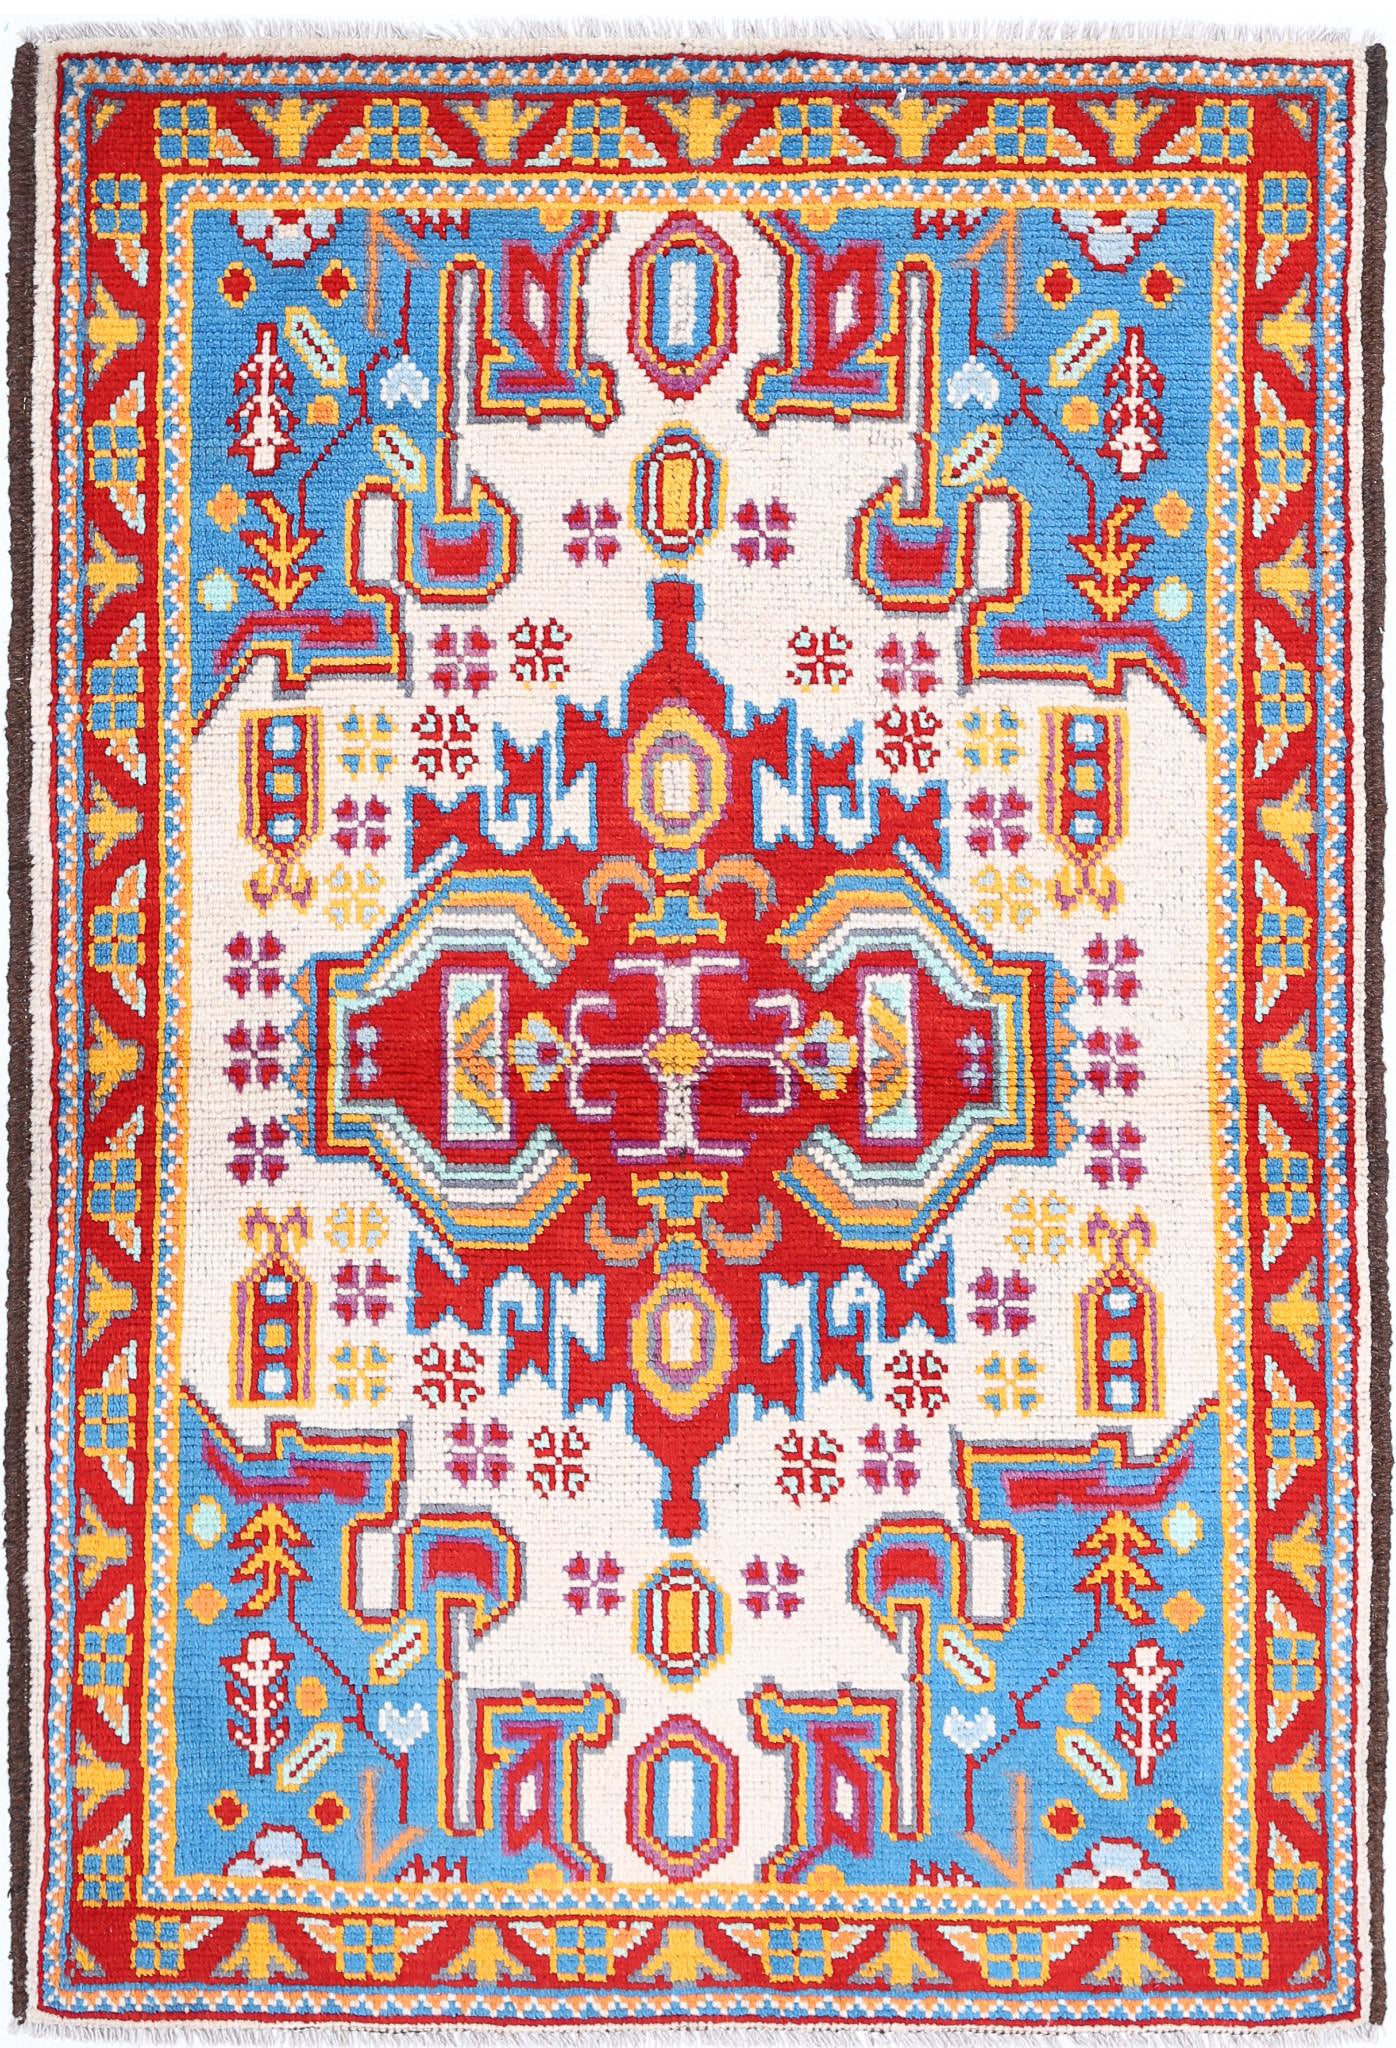 Revival-hand-knotted-qarghani-wool-rug-5014051.jpg